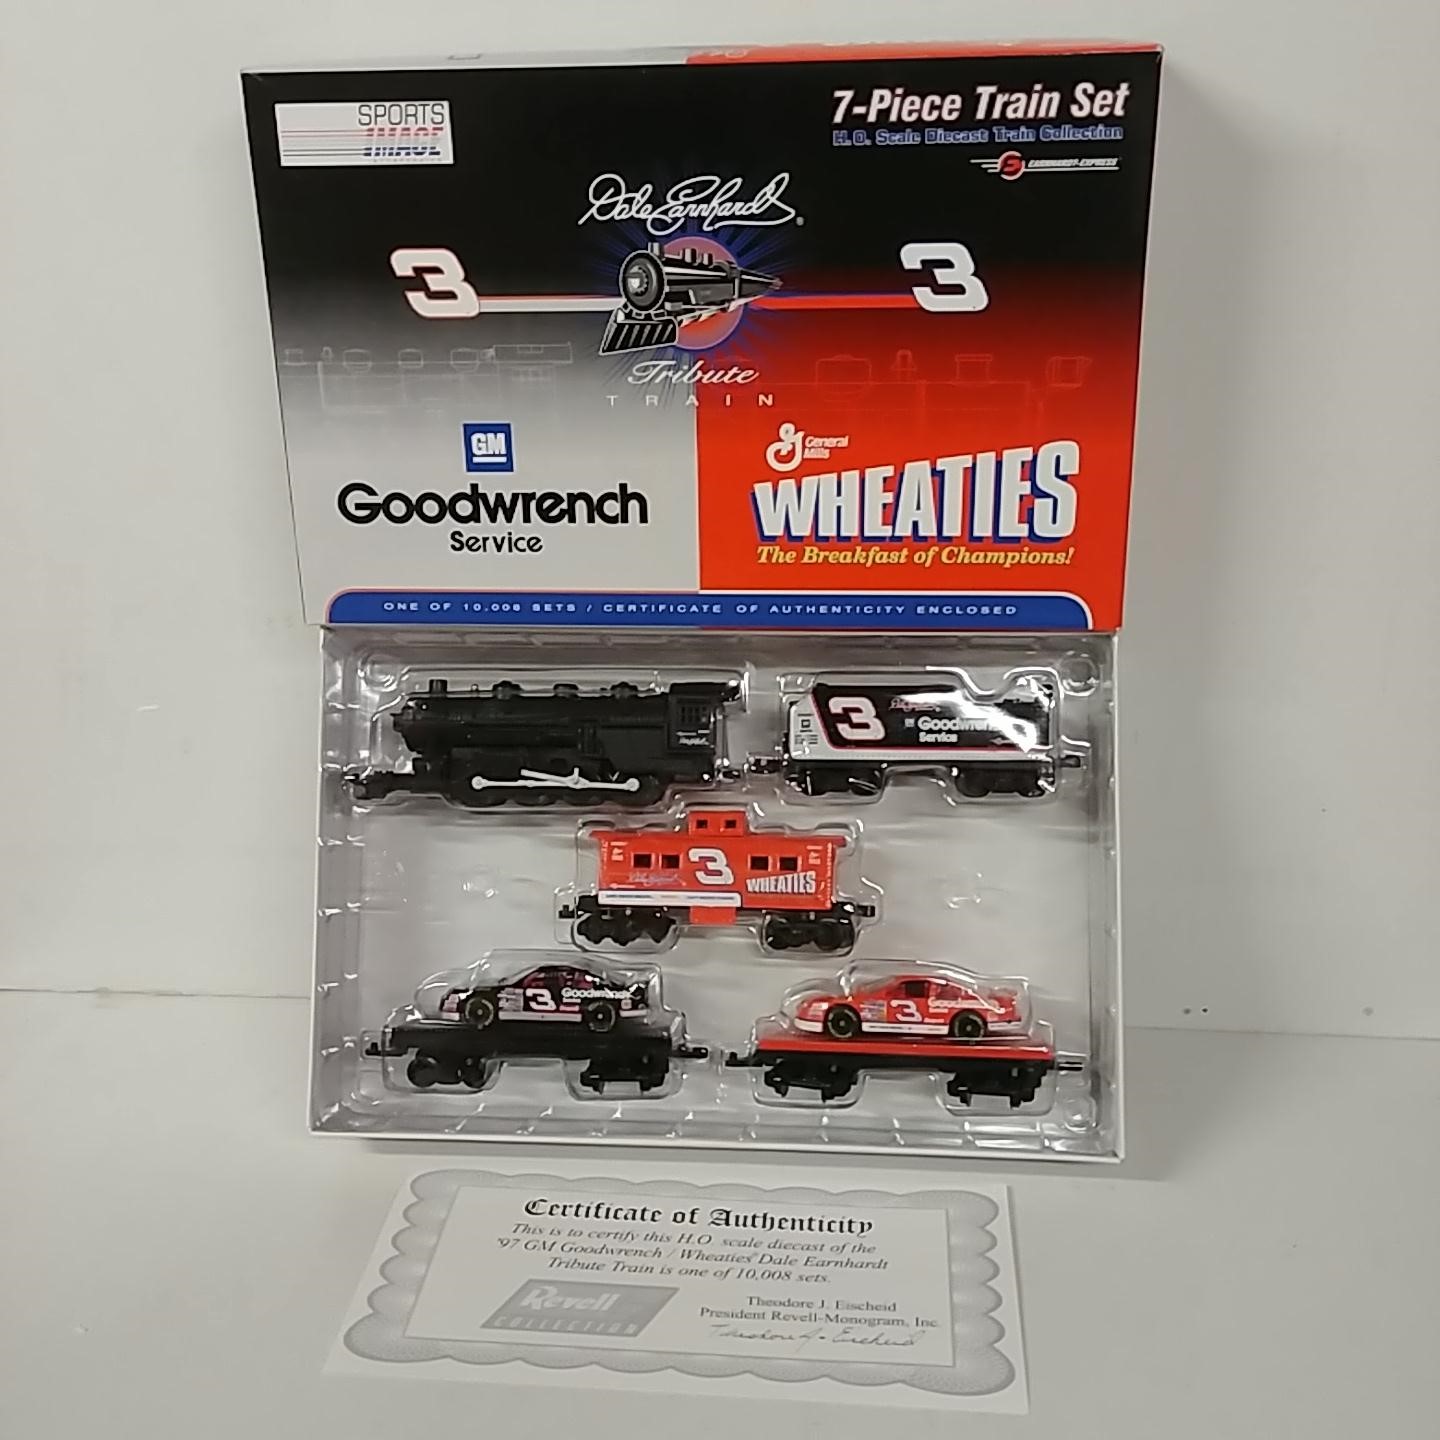 1997 Dale Earnhardt 1/64th Goodwrench "Wheaties" 7 piece train set